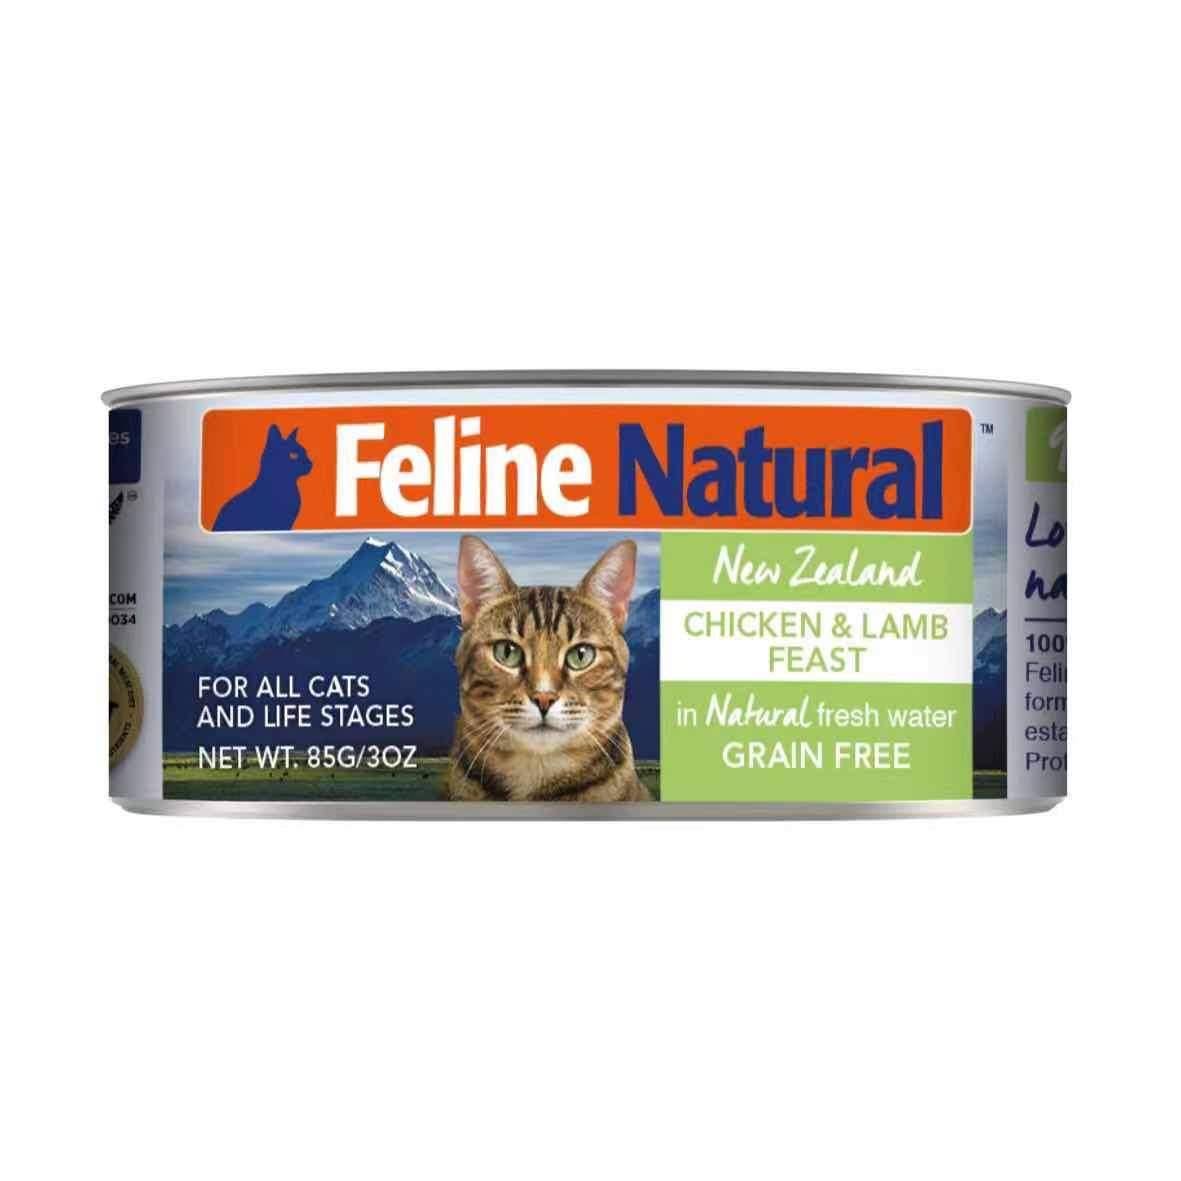 Feline Natural Cat Food - Chicken and Lamb